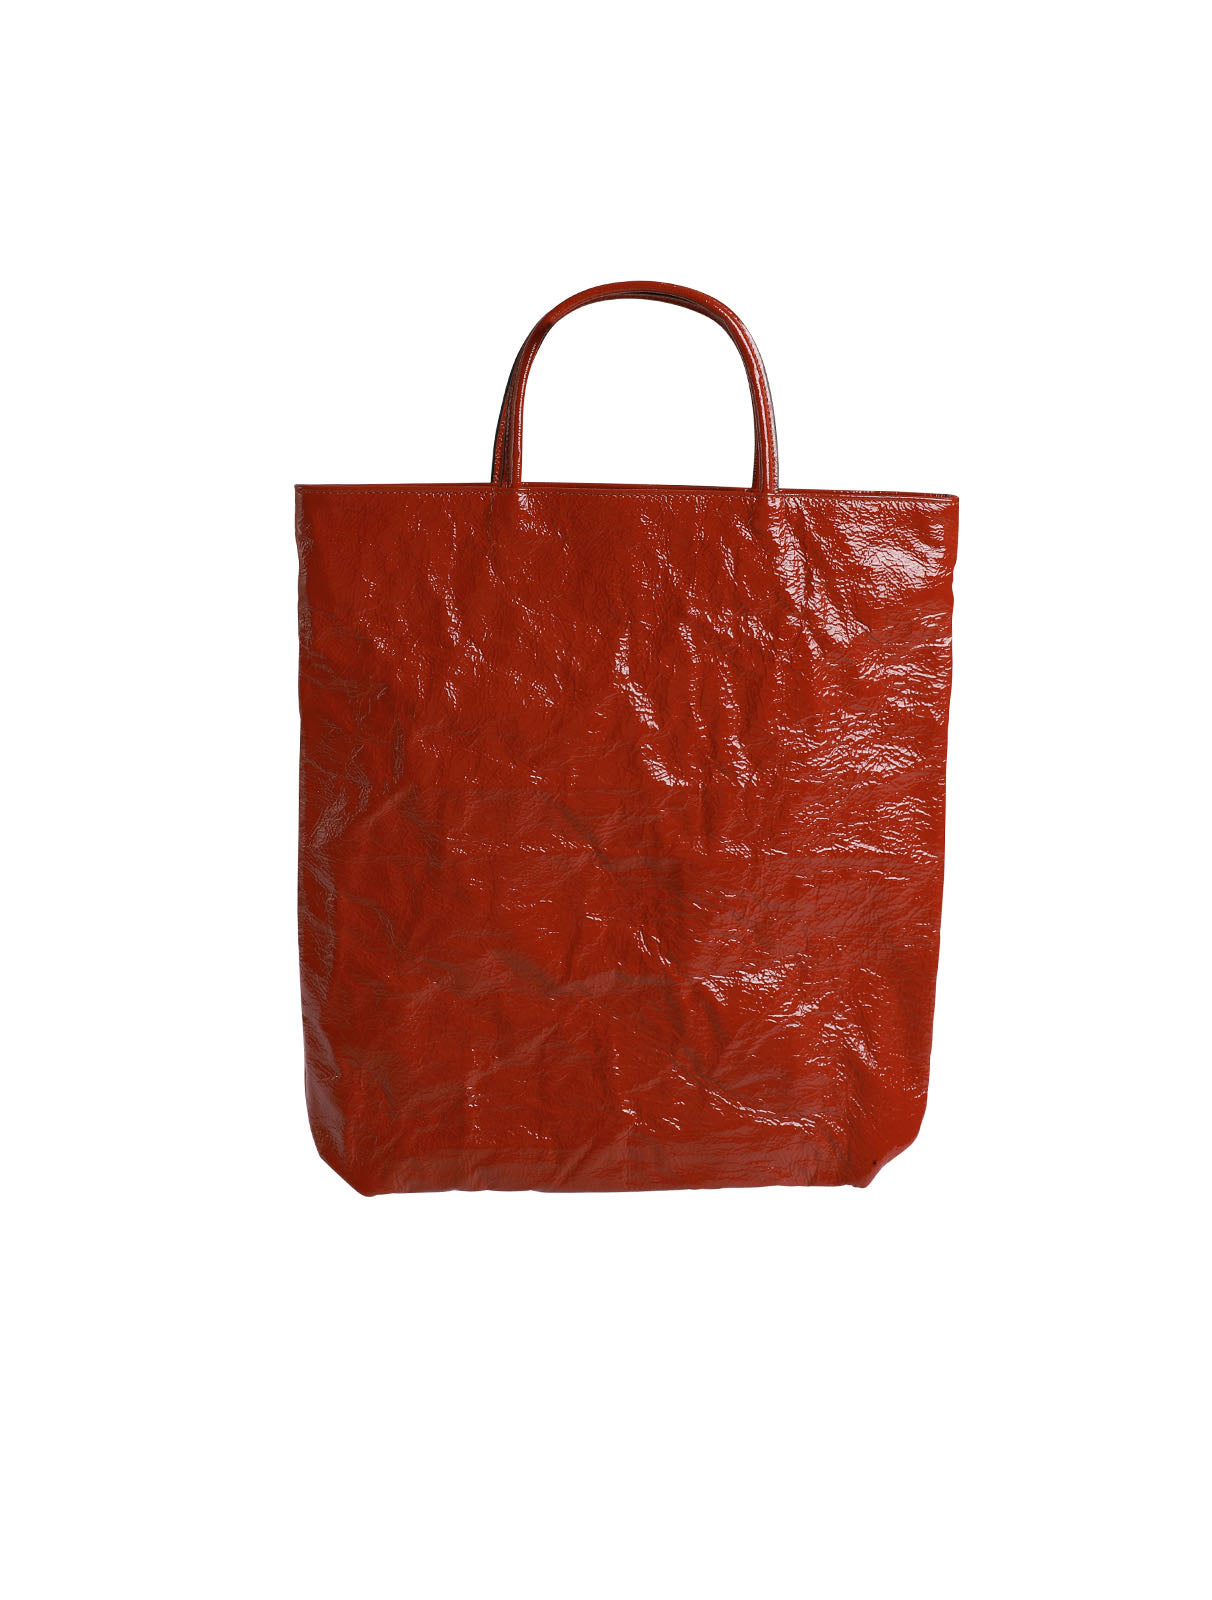 Emery Tote Red Patent Leather Tote Bag